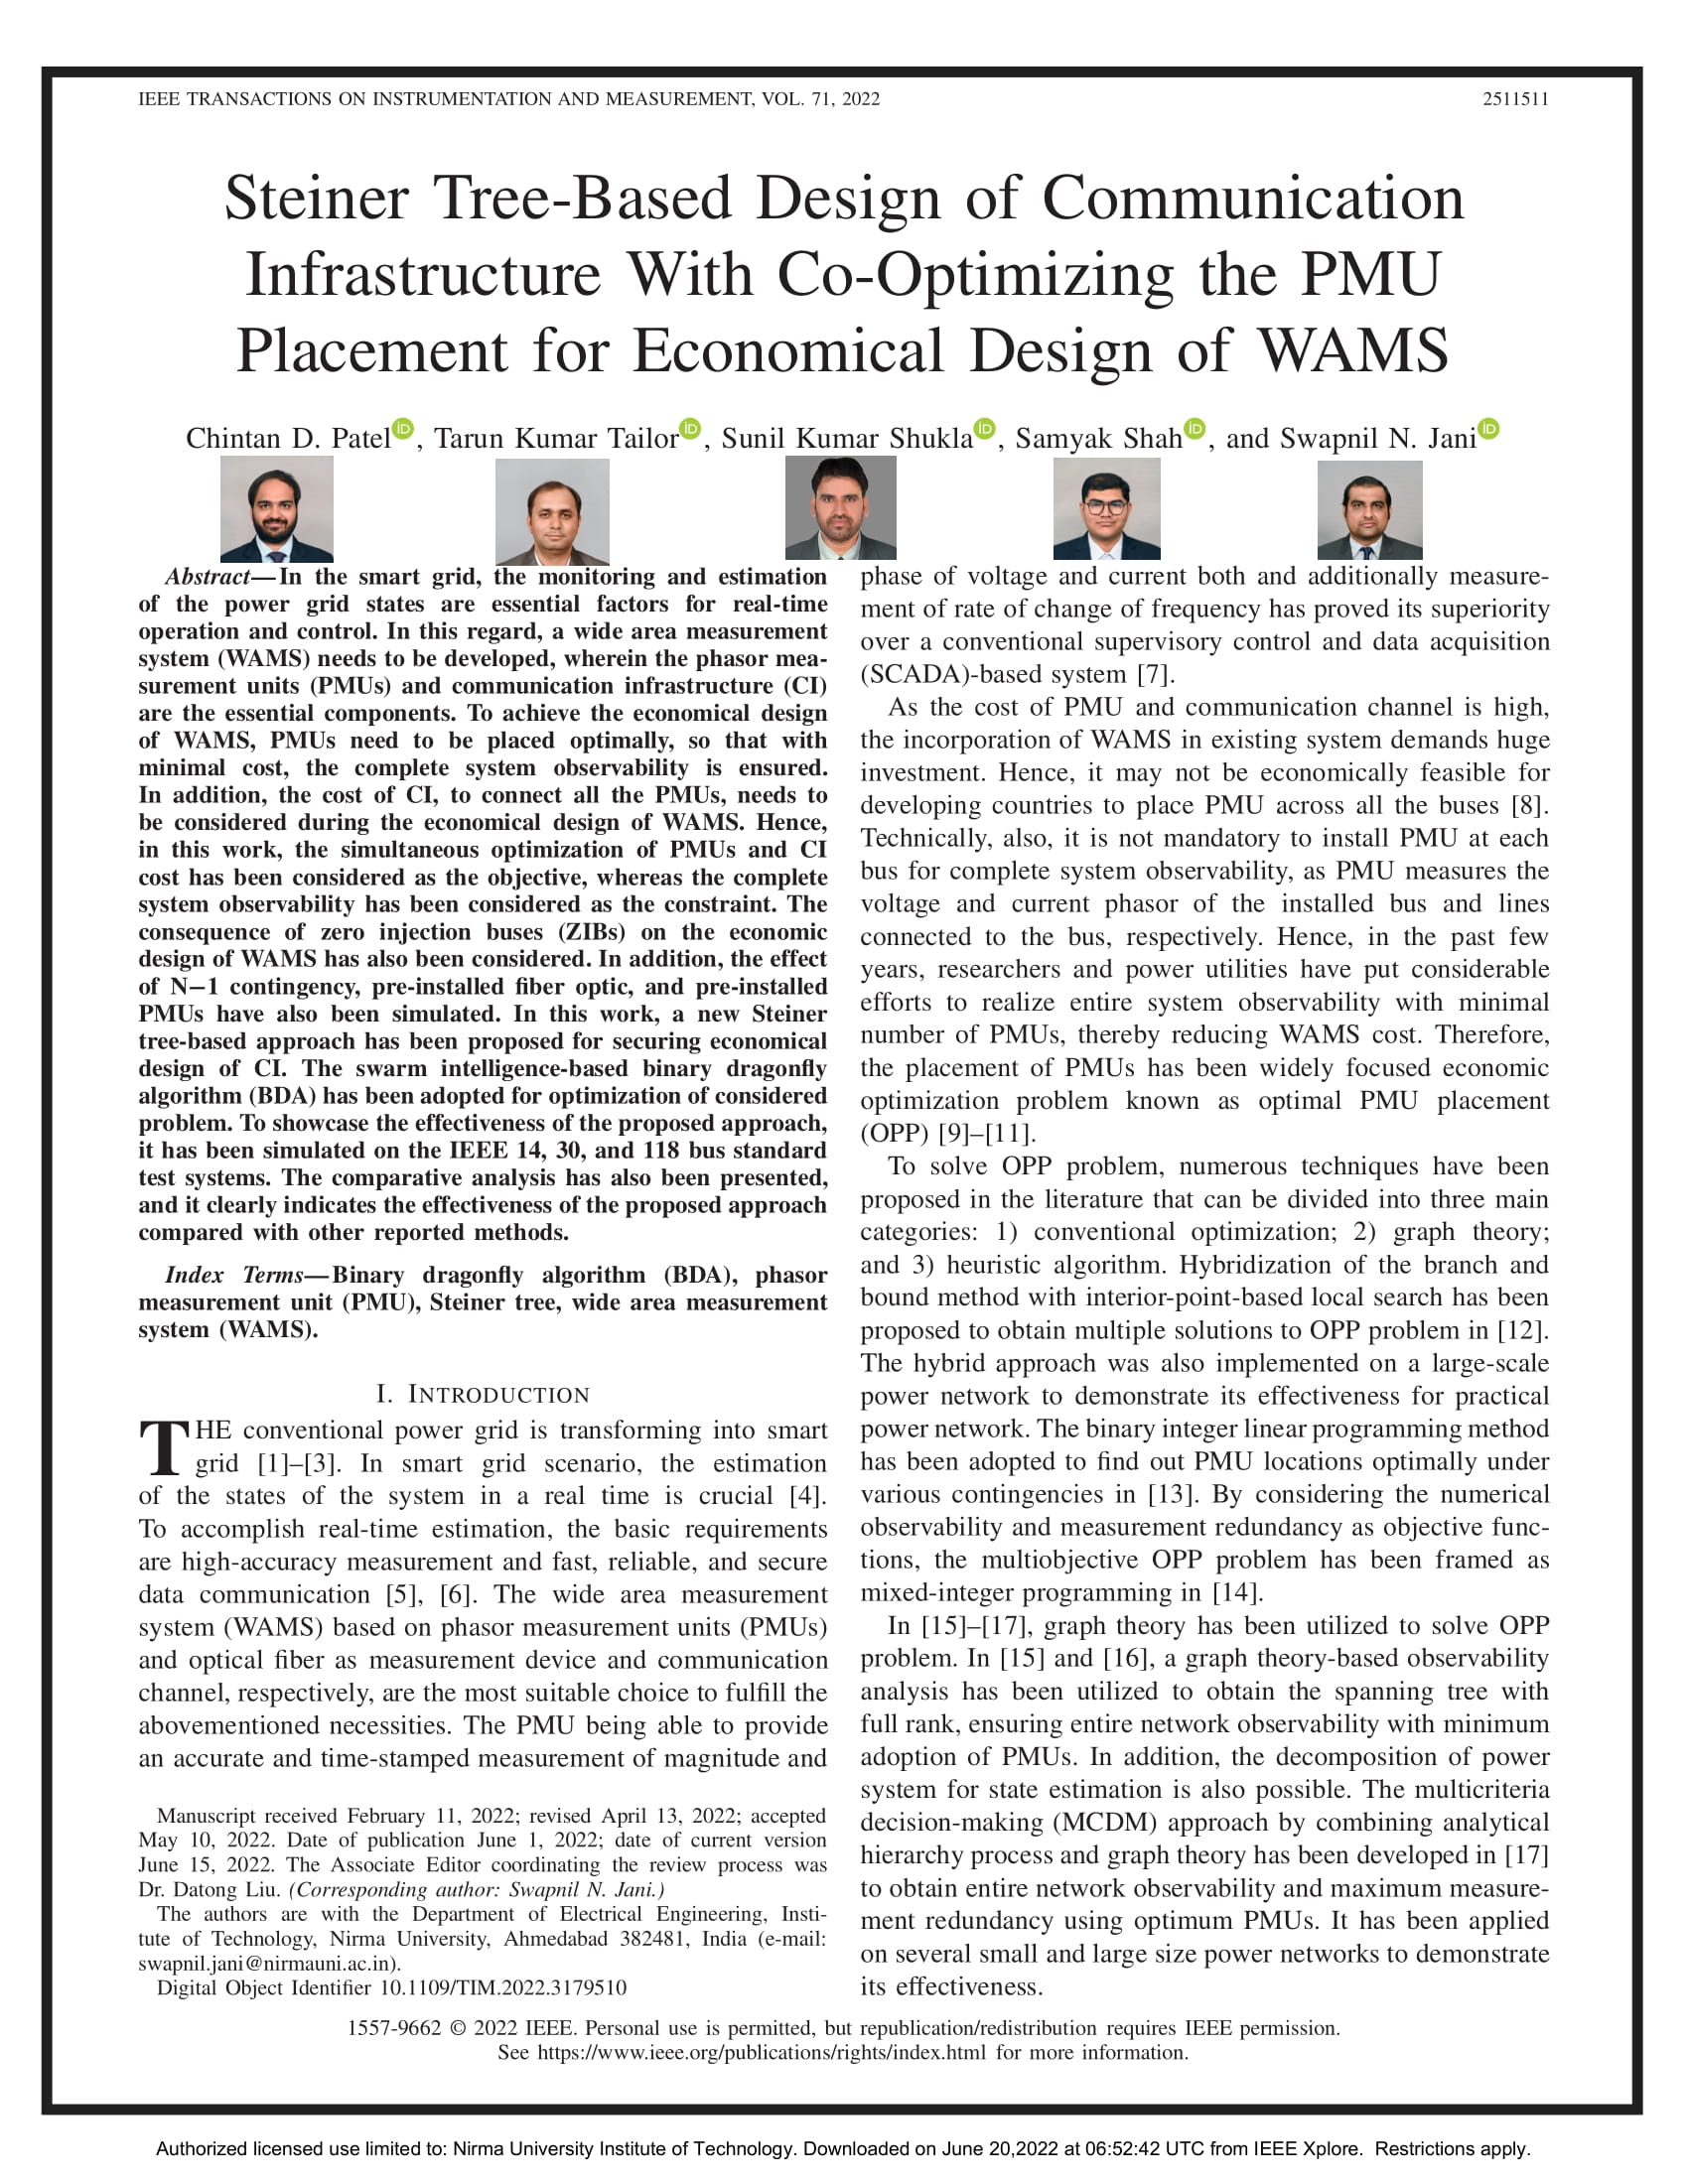 Steiner Tree-Based Design of Communication Infrastructure With Co-Optimizing the PMU Placement for Economical Design of WAMS